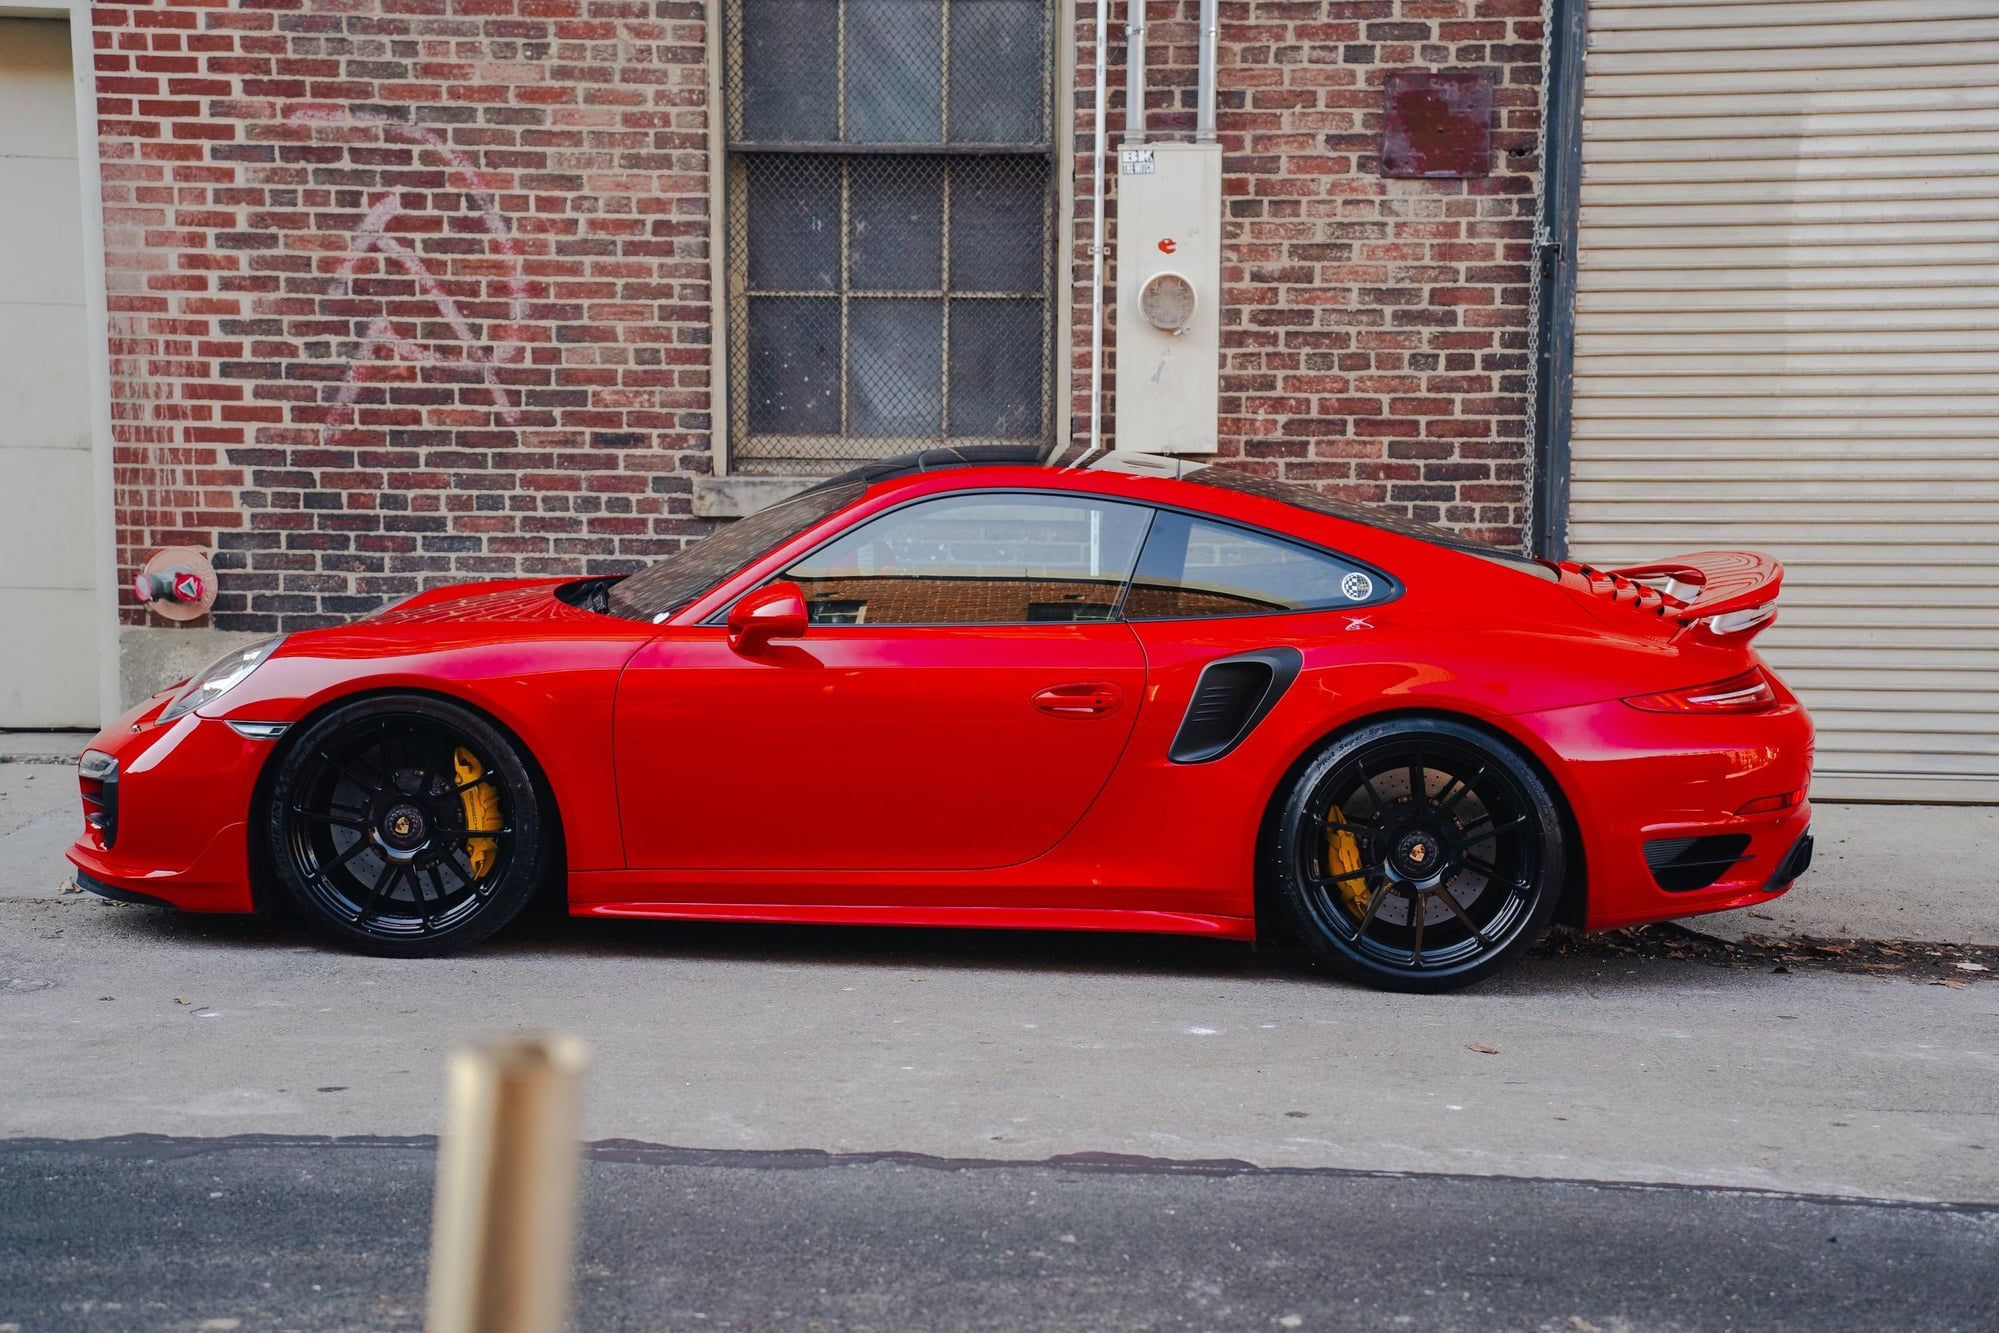 2014 Porsche 911 -  - Used - VIN WPOAD2A99ES167745 - 100,000 Miles - 6 cyl - AWD - Automatic - Coupe - Red - Cincinnati, OH 45244, United States